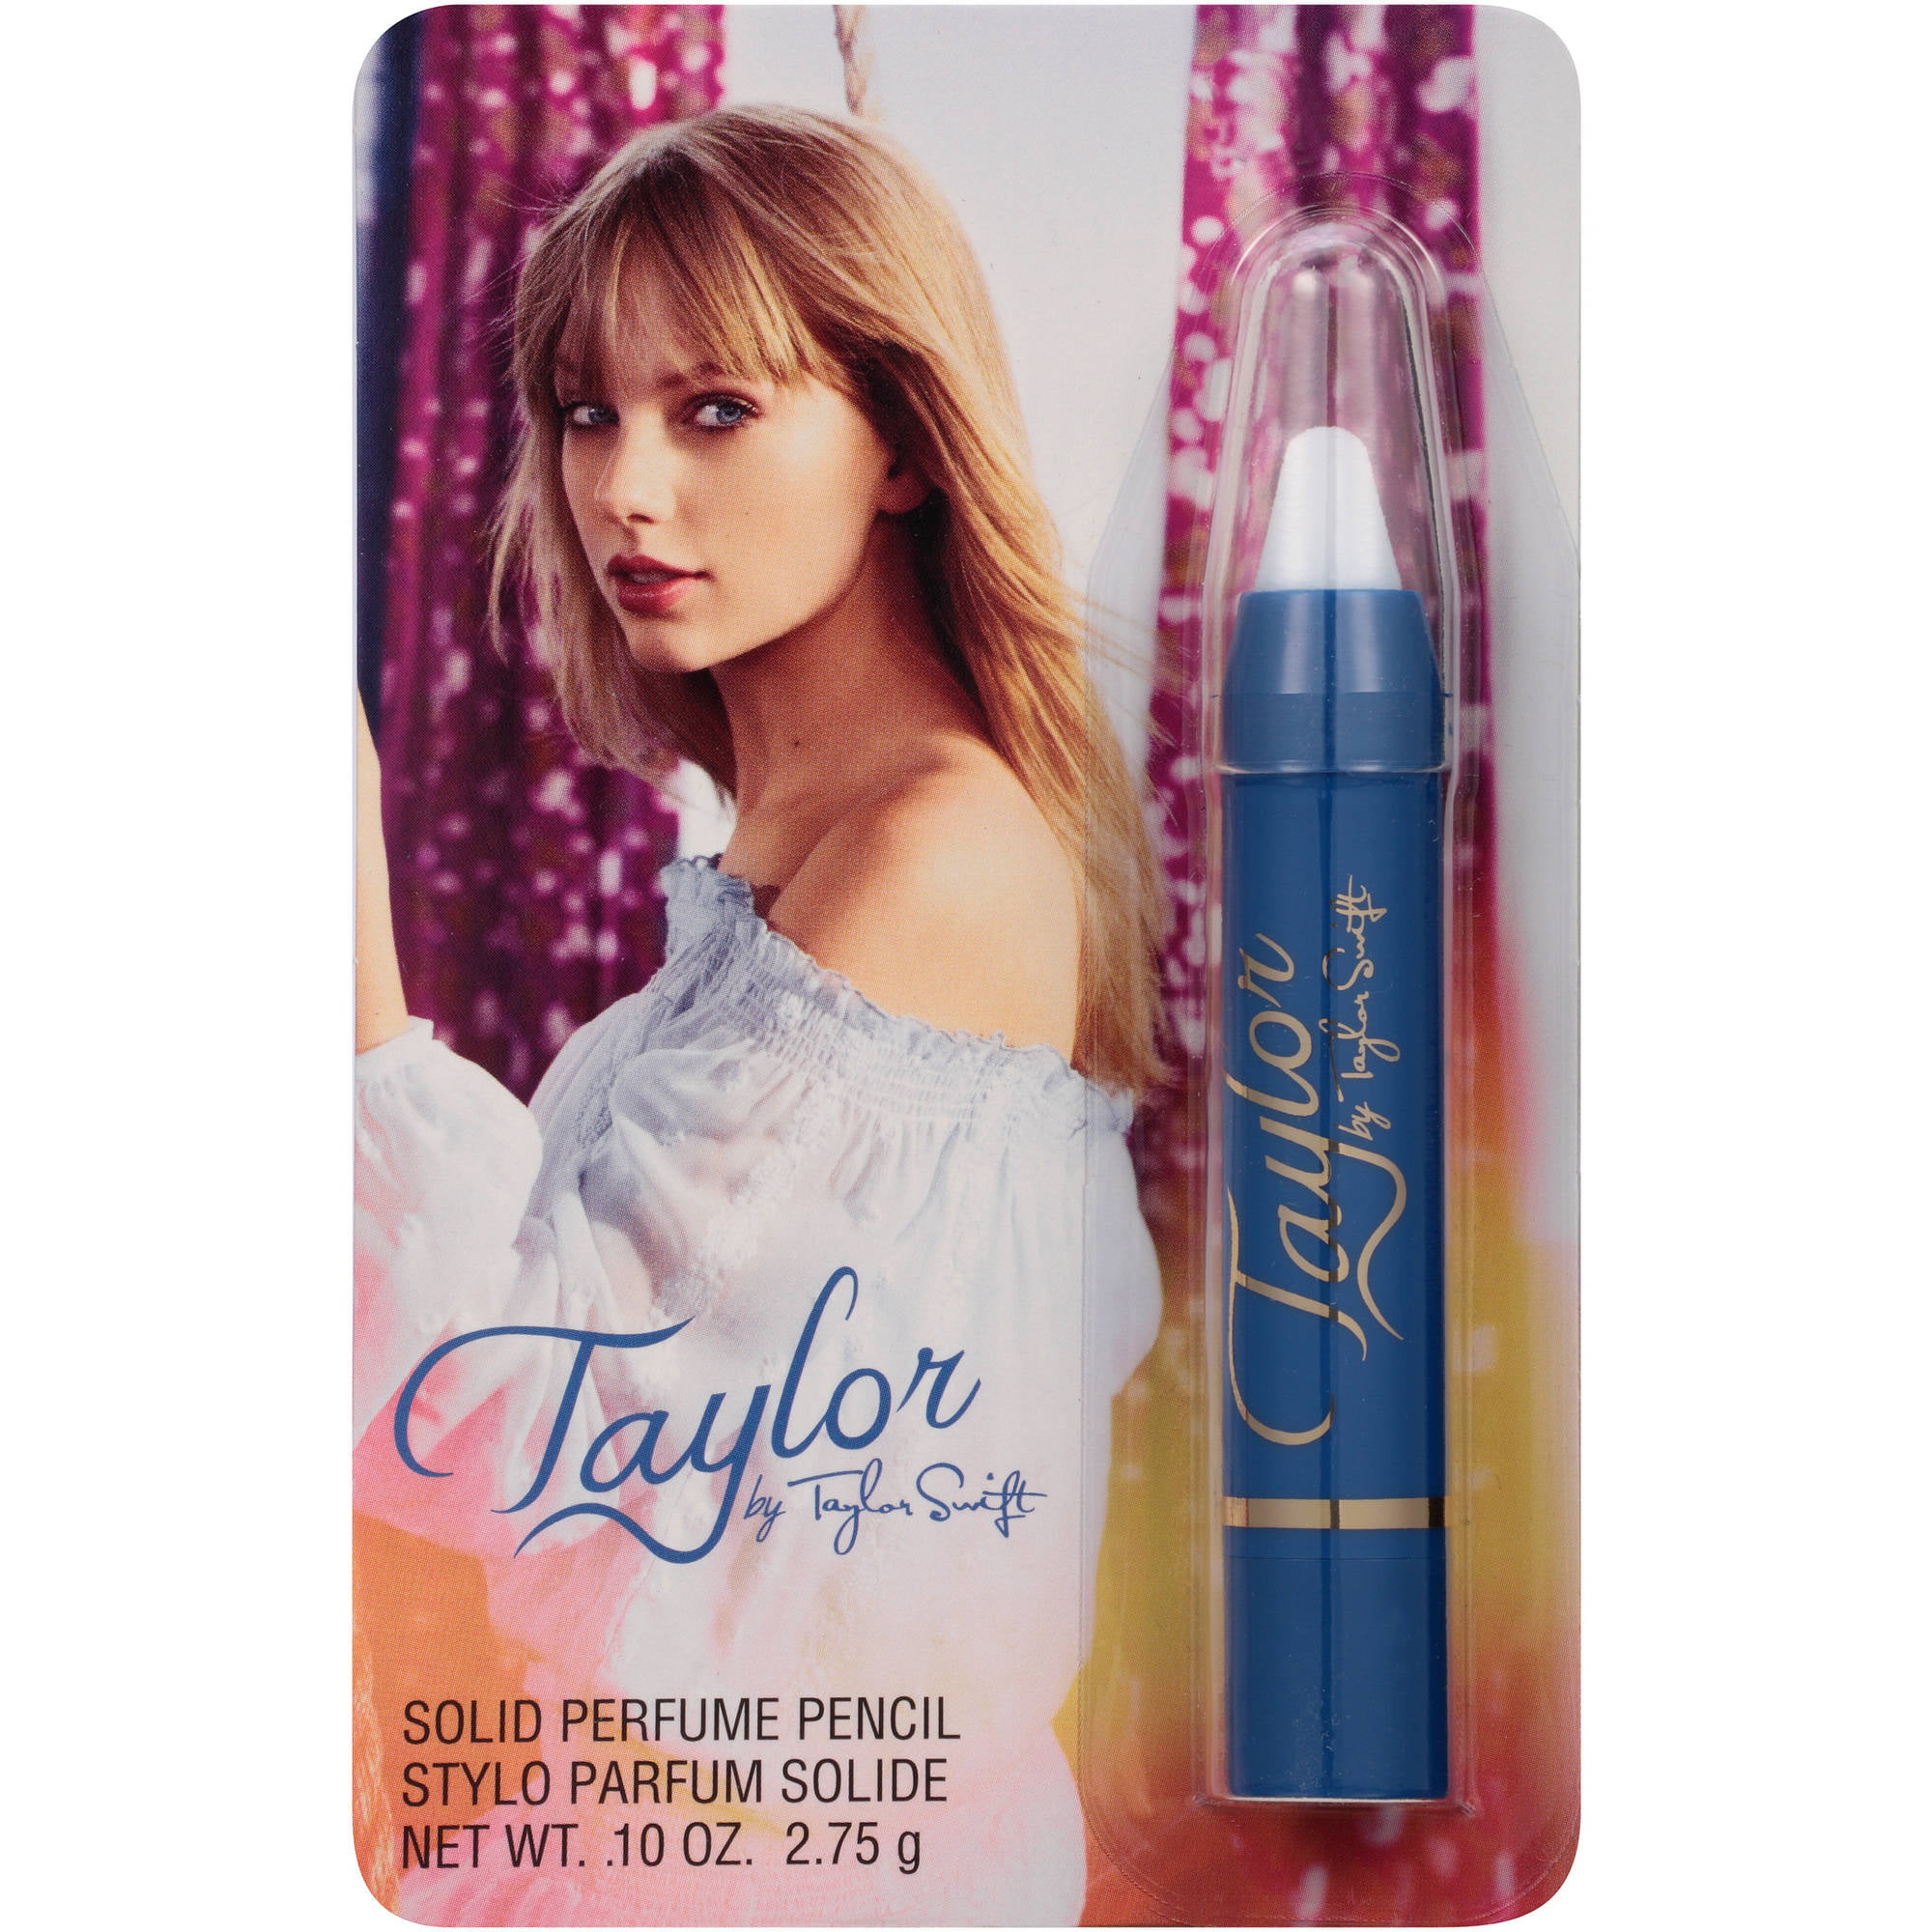 Taylor by Taylor Swift Solid Perfume Pencil, 0.10 oz